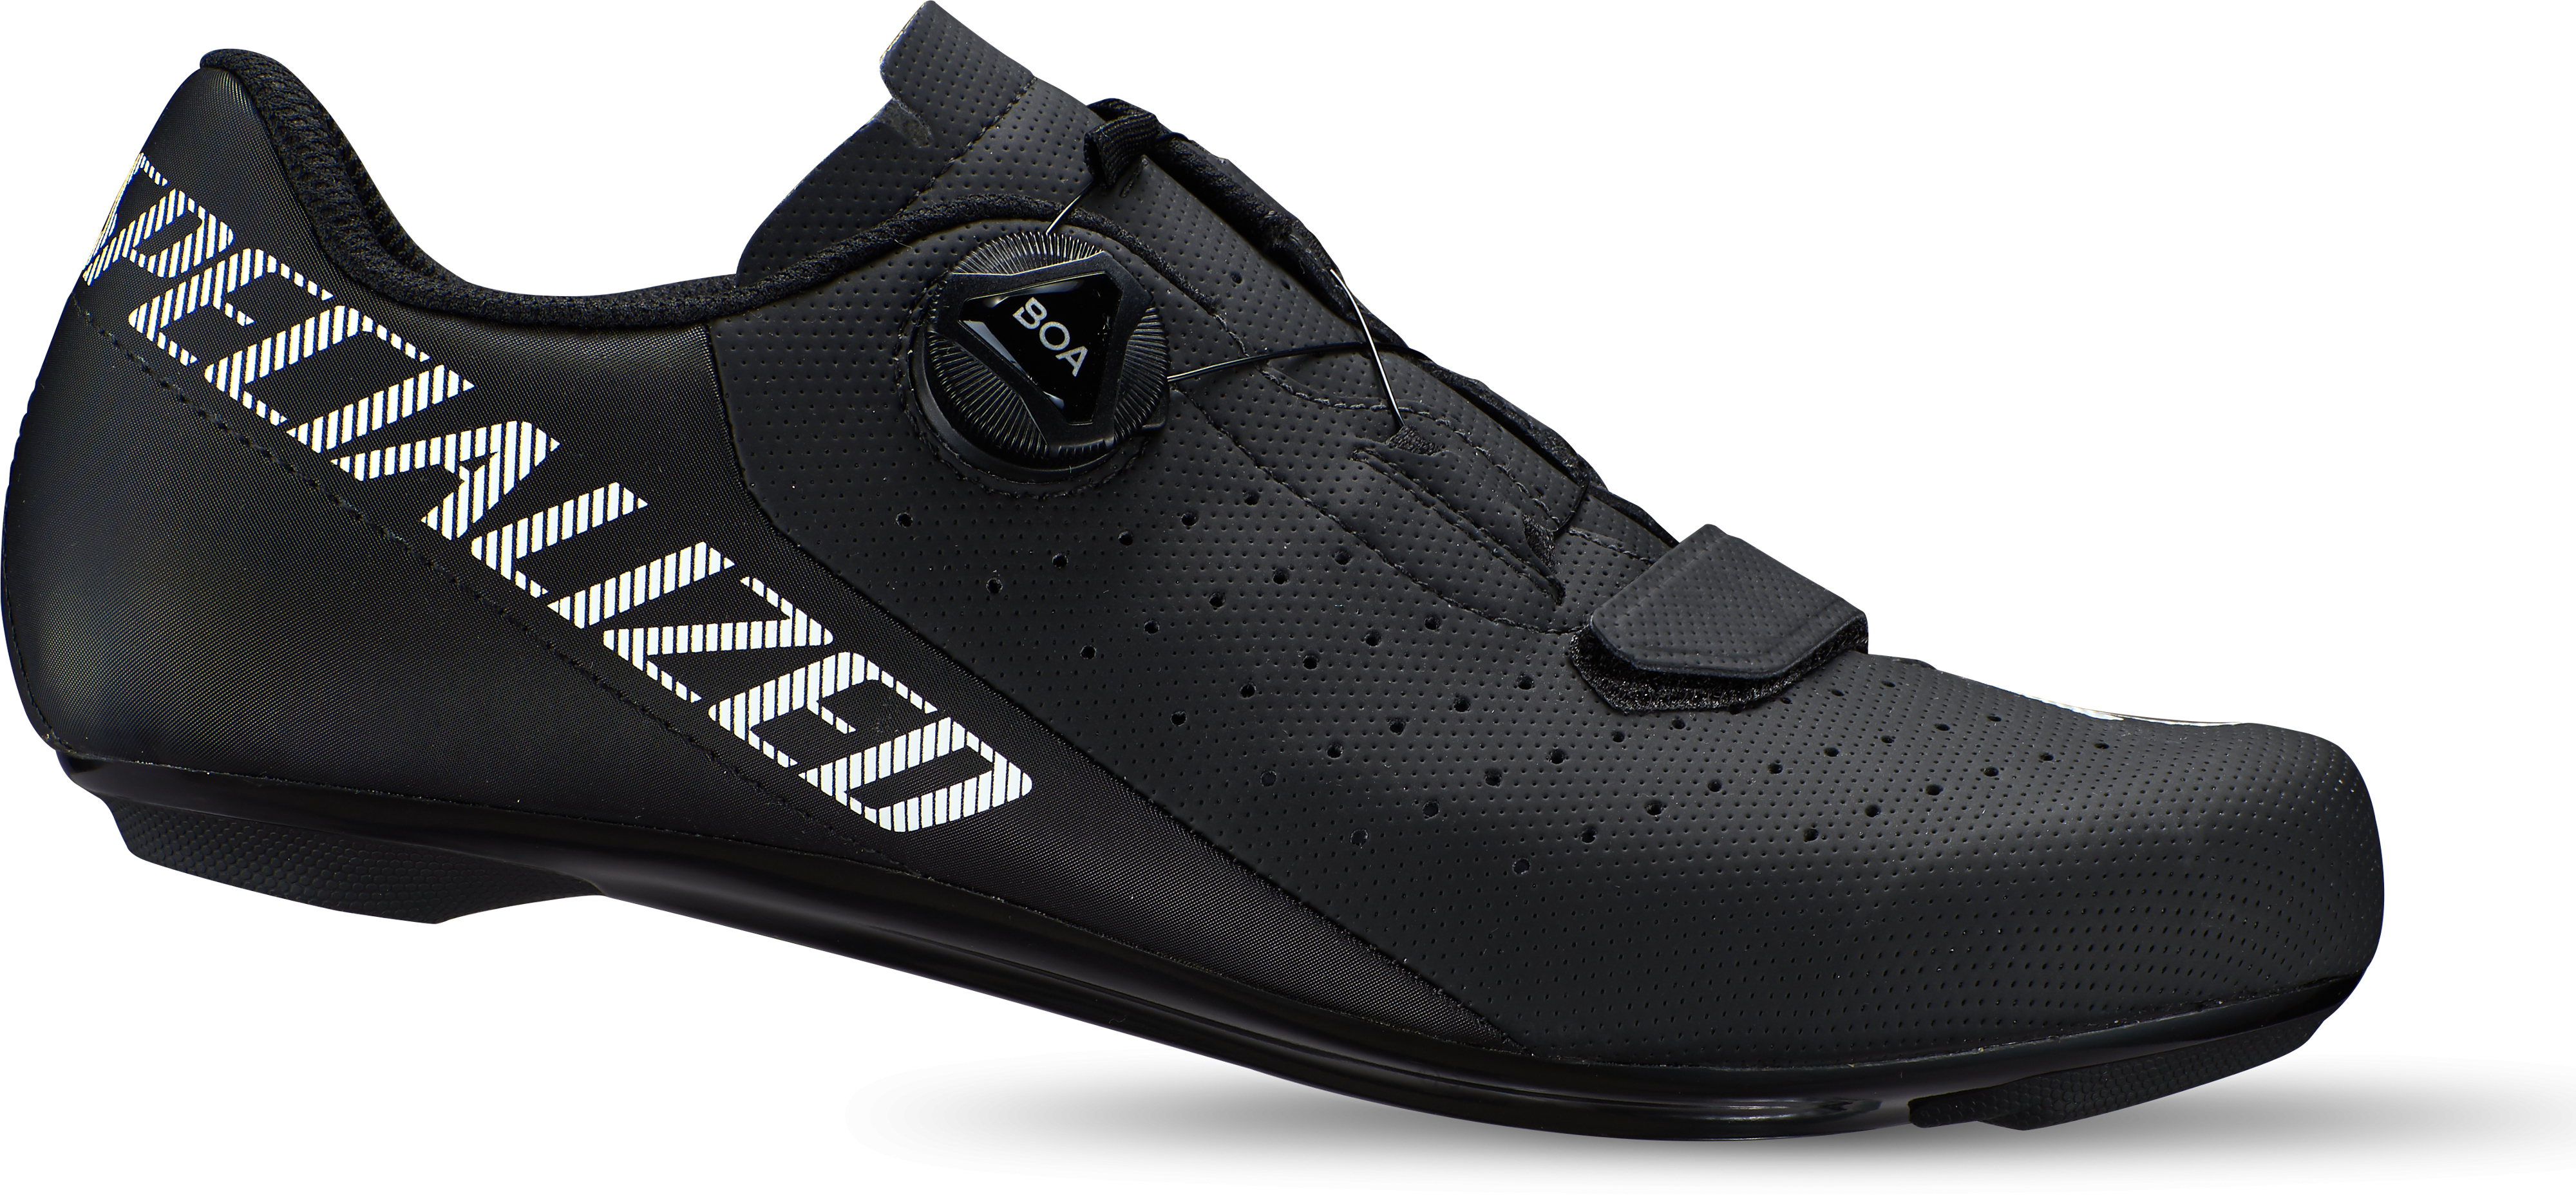 Specialized  Torch 1.0 Road Cycling Shoes  49 Black